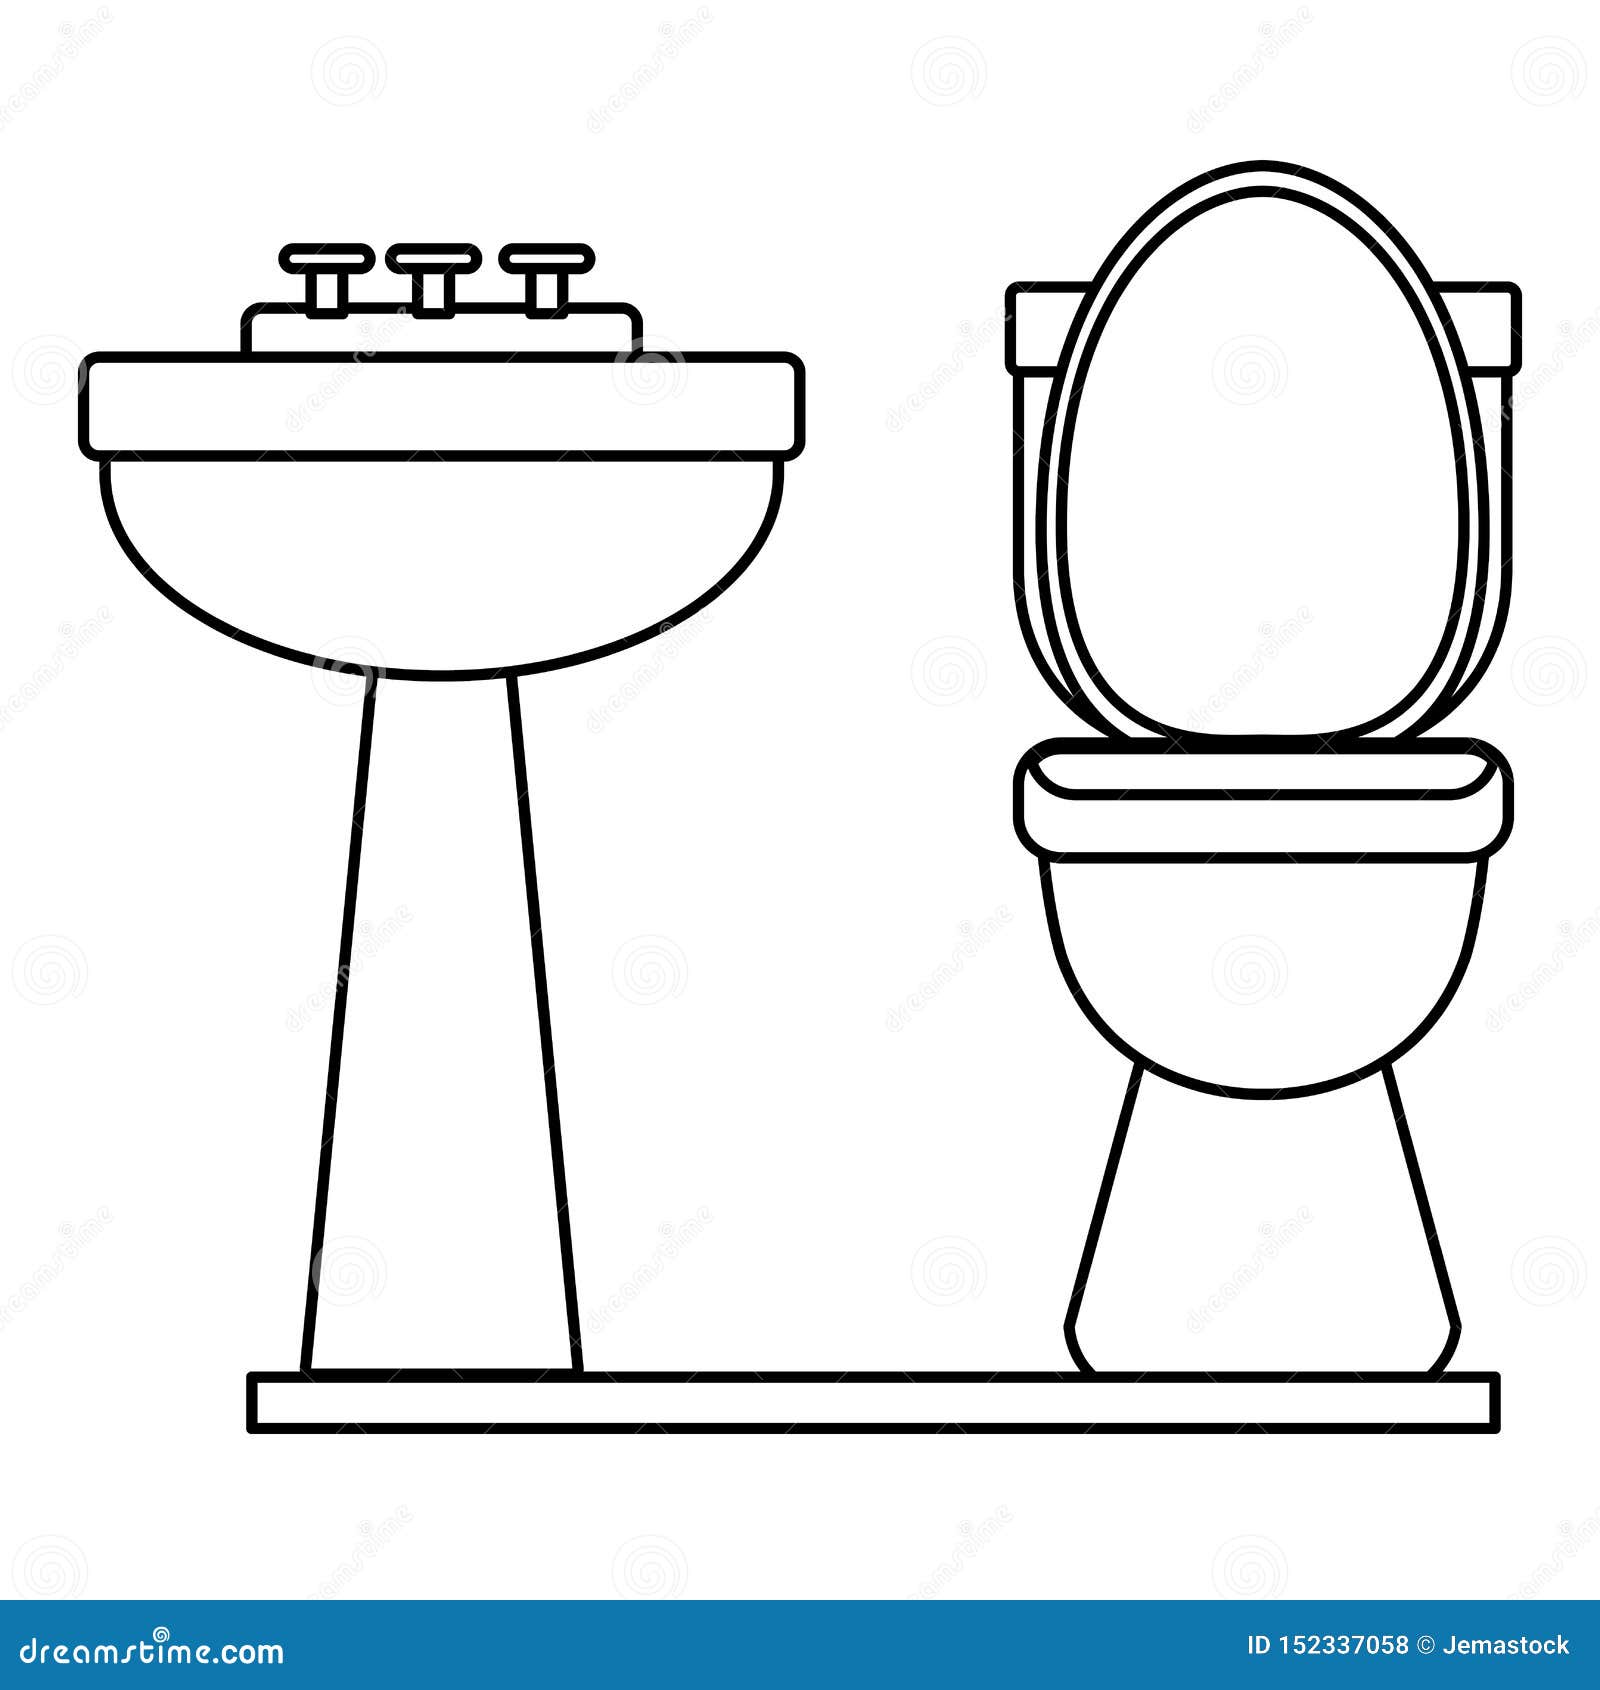 Handwashing And Toilet Icon Cartoon In Black And White Stock Vector Illustration Of Clean Domestic 152337058